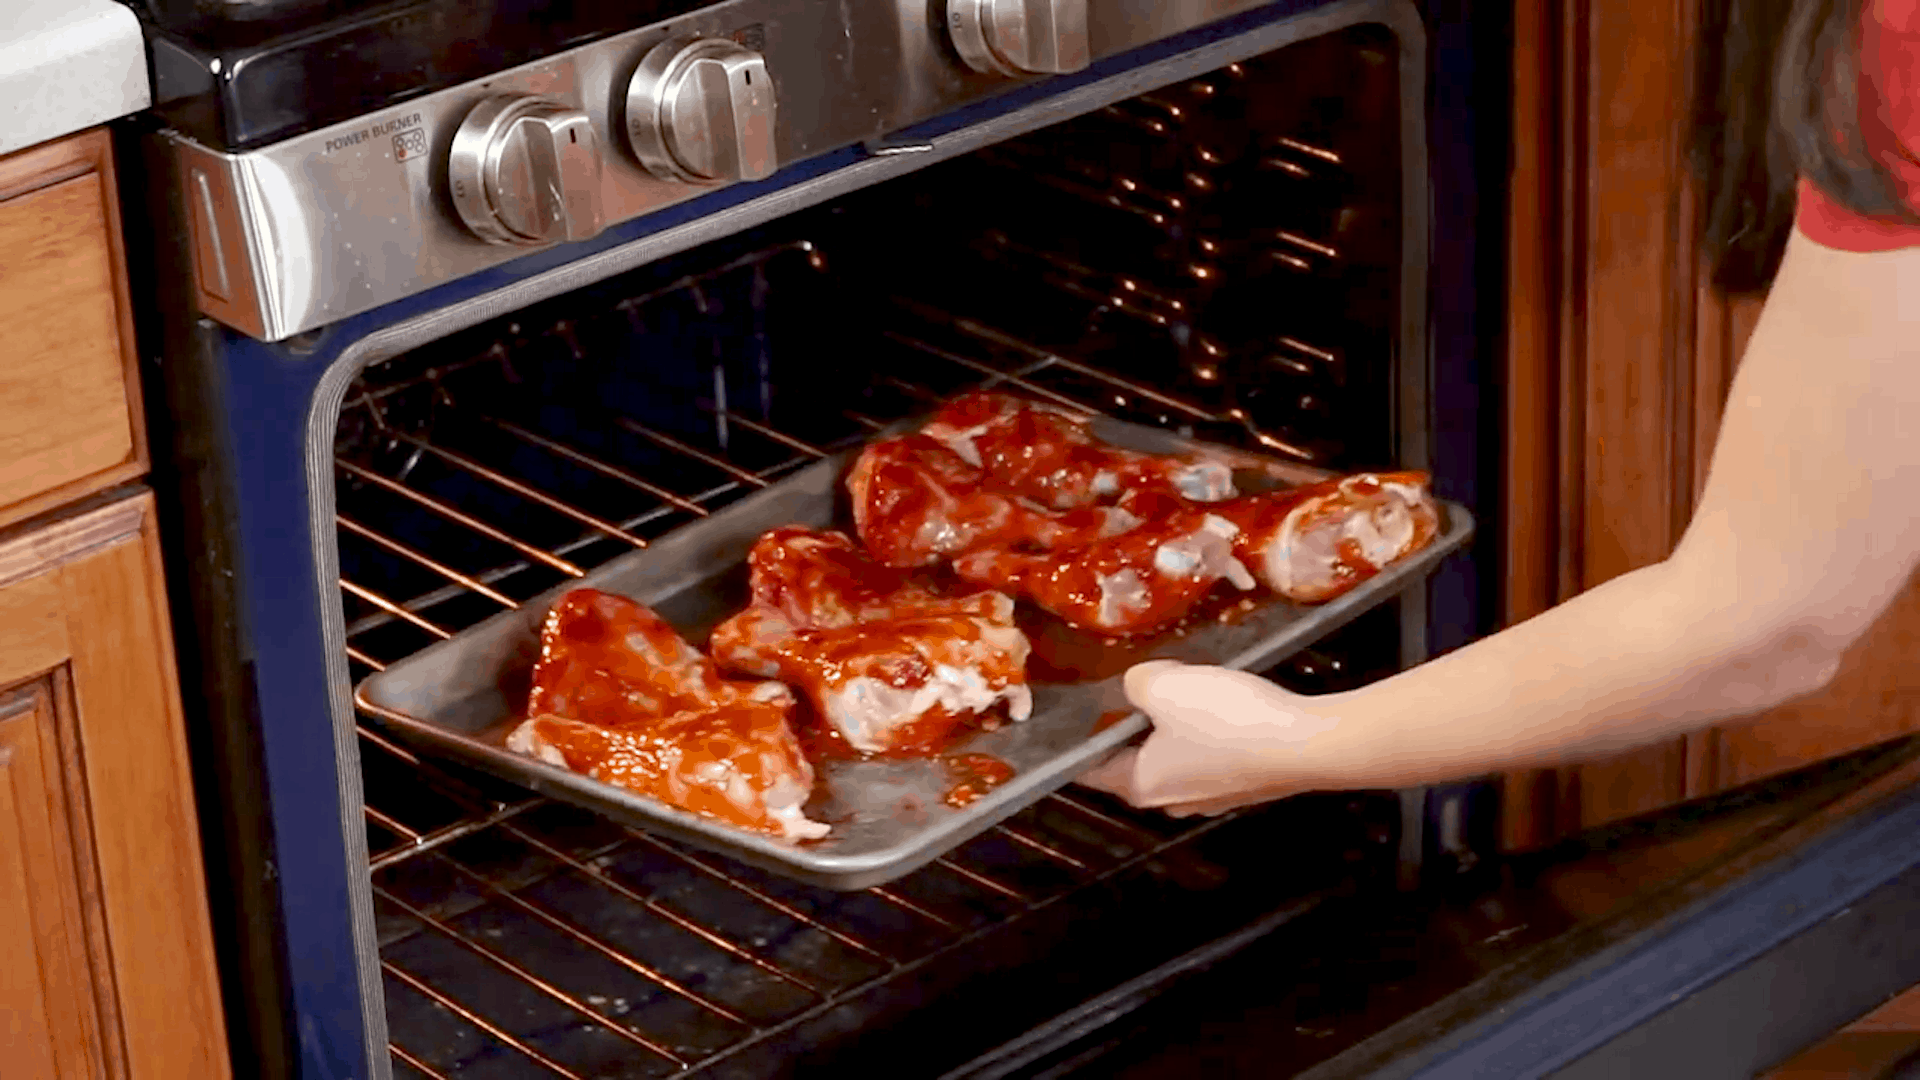 Sheet pan filled with bbq chicken drumsticks being placed into the oven